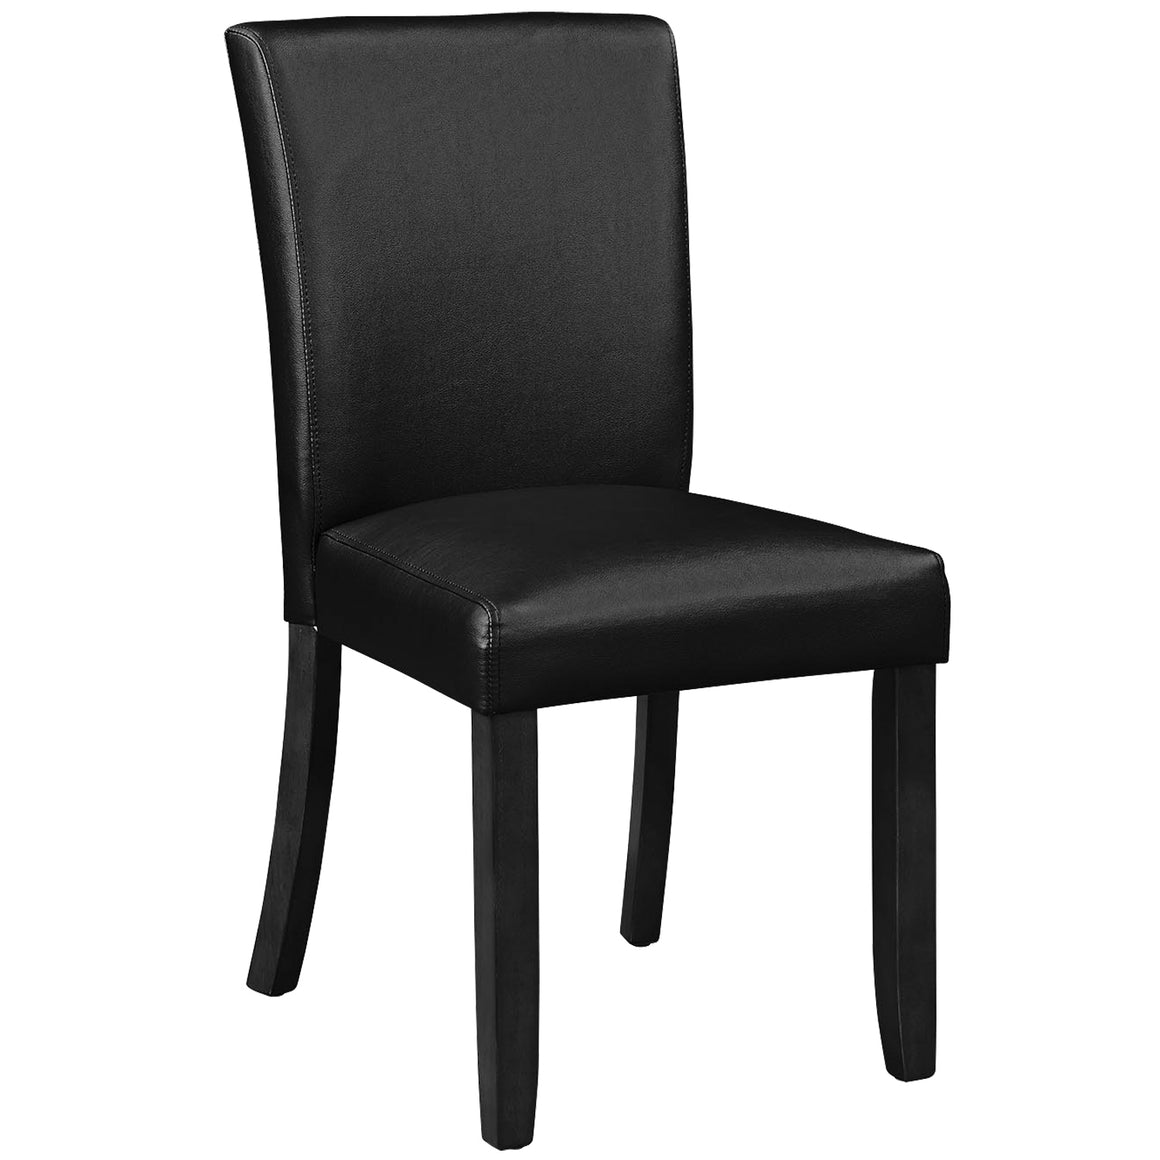 RAM Game Room Game/Dining Chair - Black - GCHR3 BLK